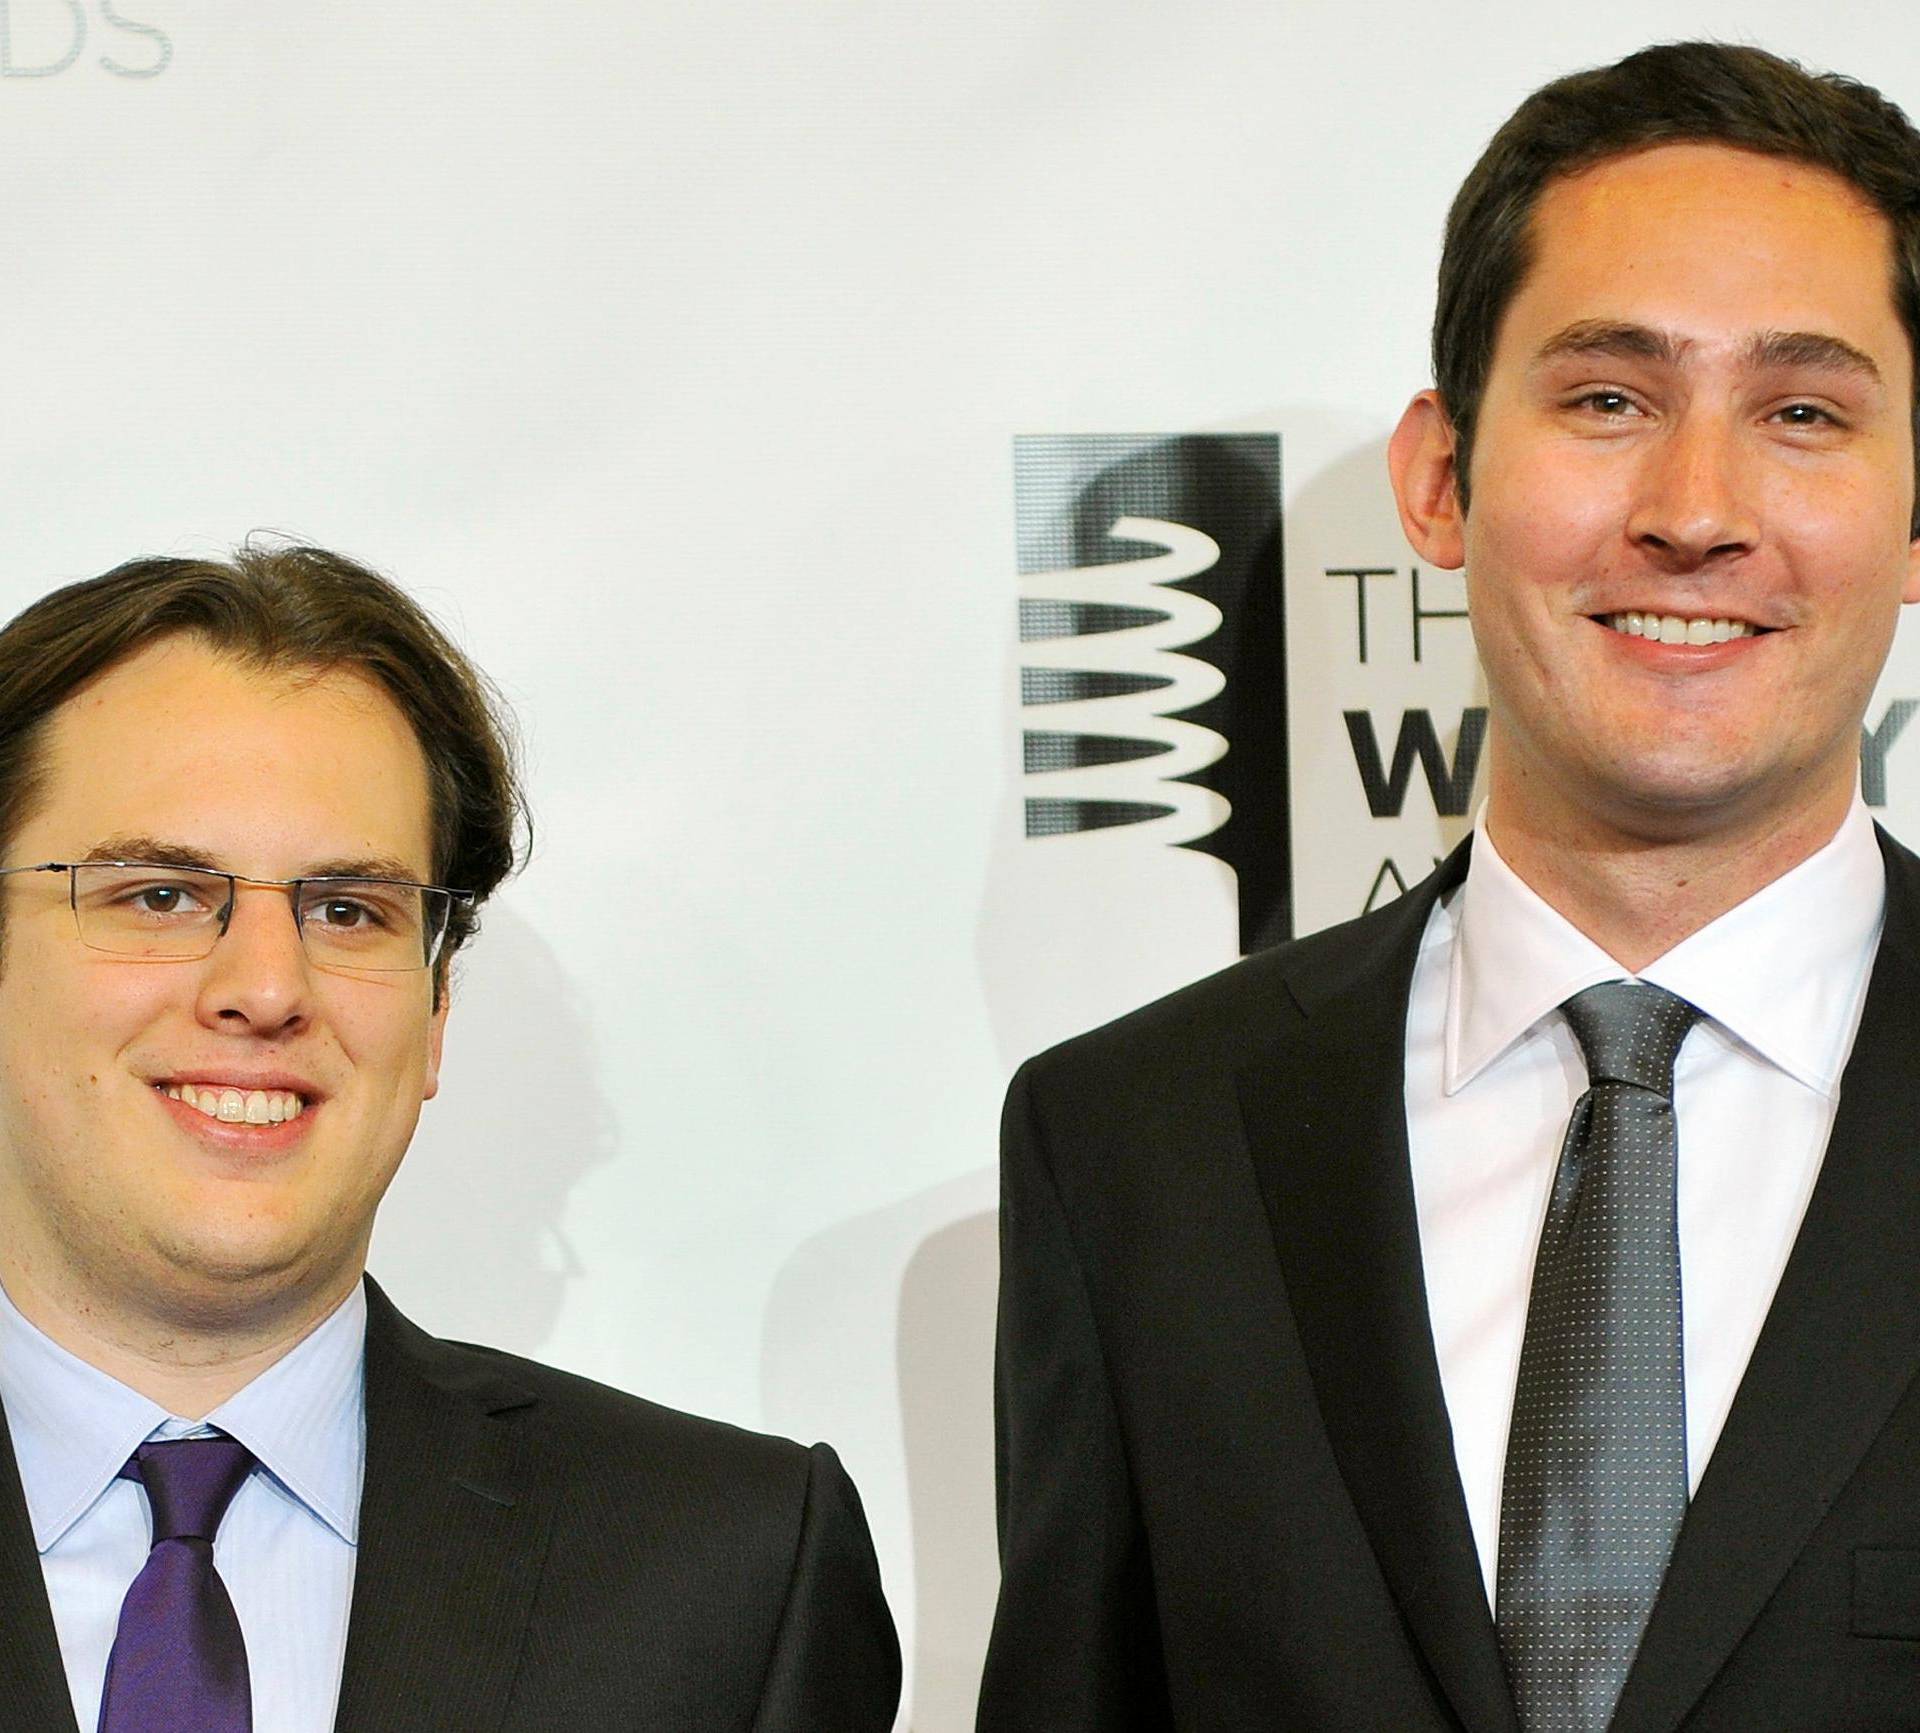 FILE PHOTO: Instagram founders Krieger and Systrom attend the 16th annual Webby Awards in New York